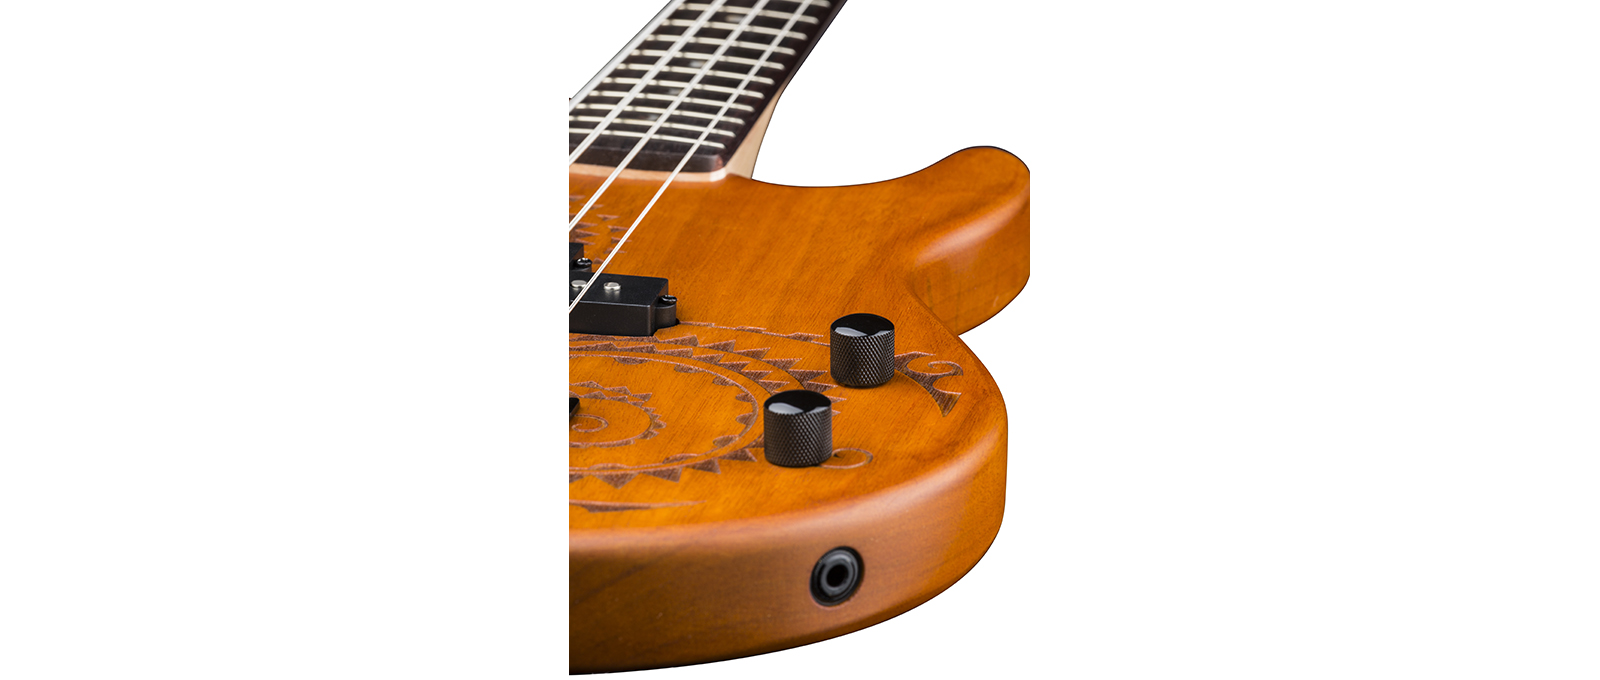 Luna Tattoo Bass Guitar: A Perfect Blend of Style and Sound